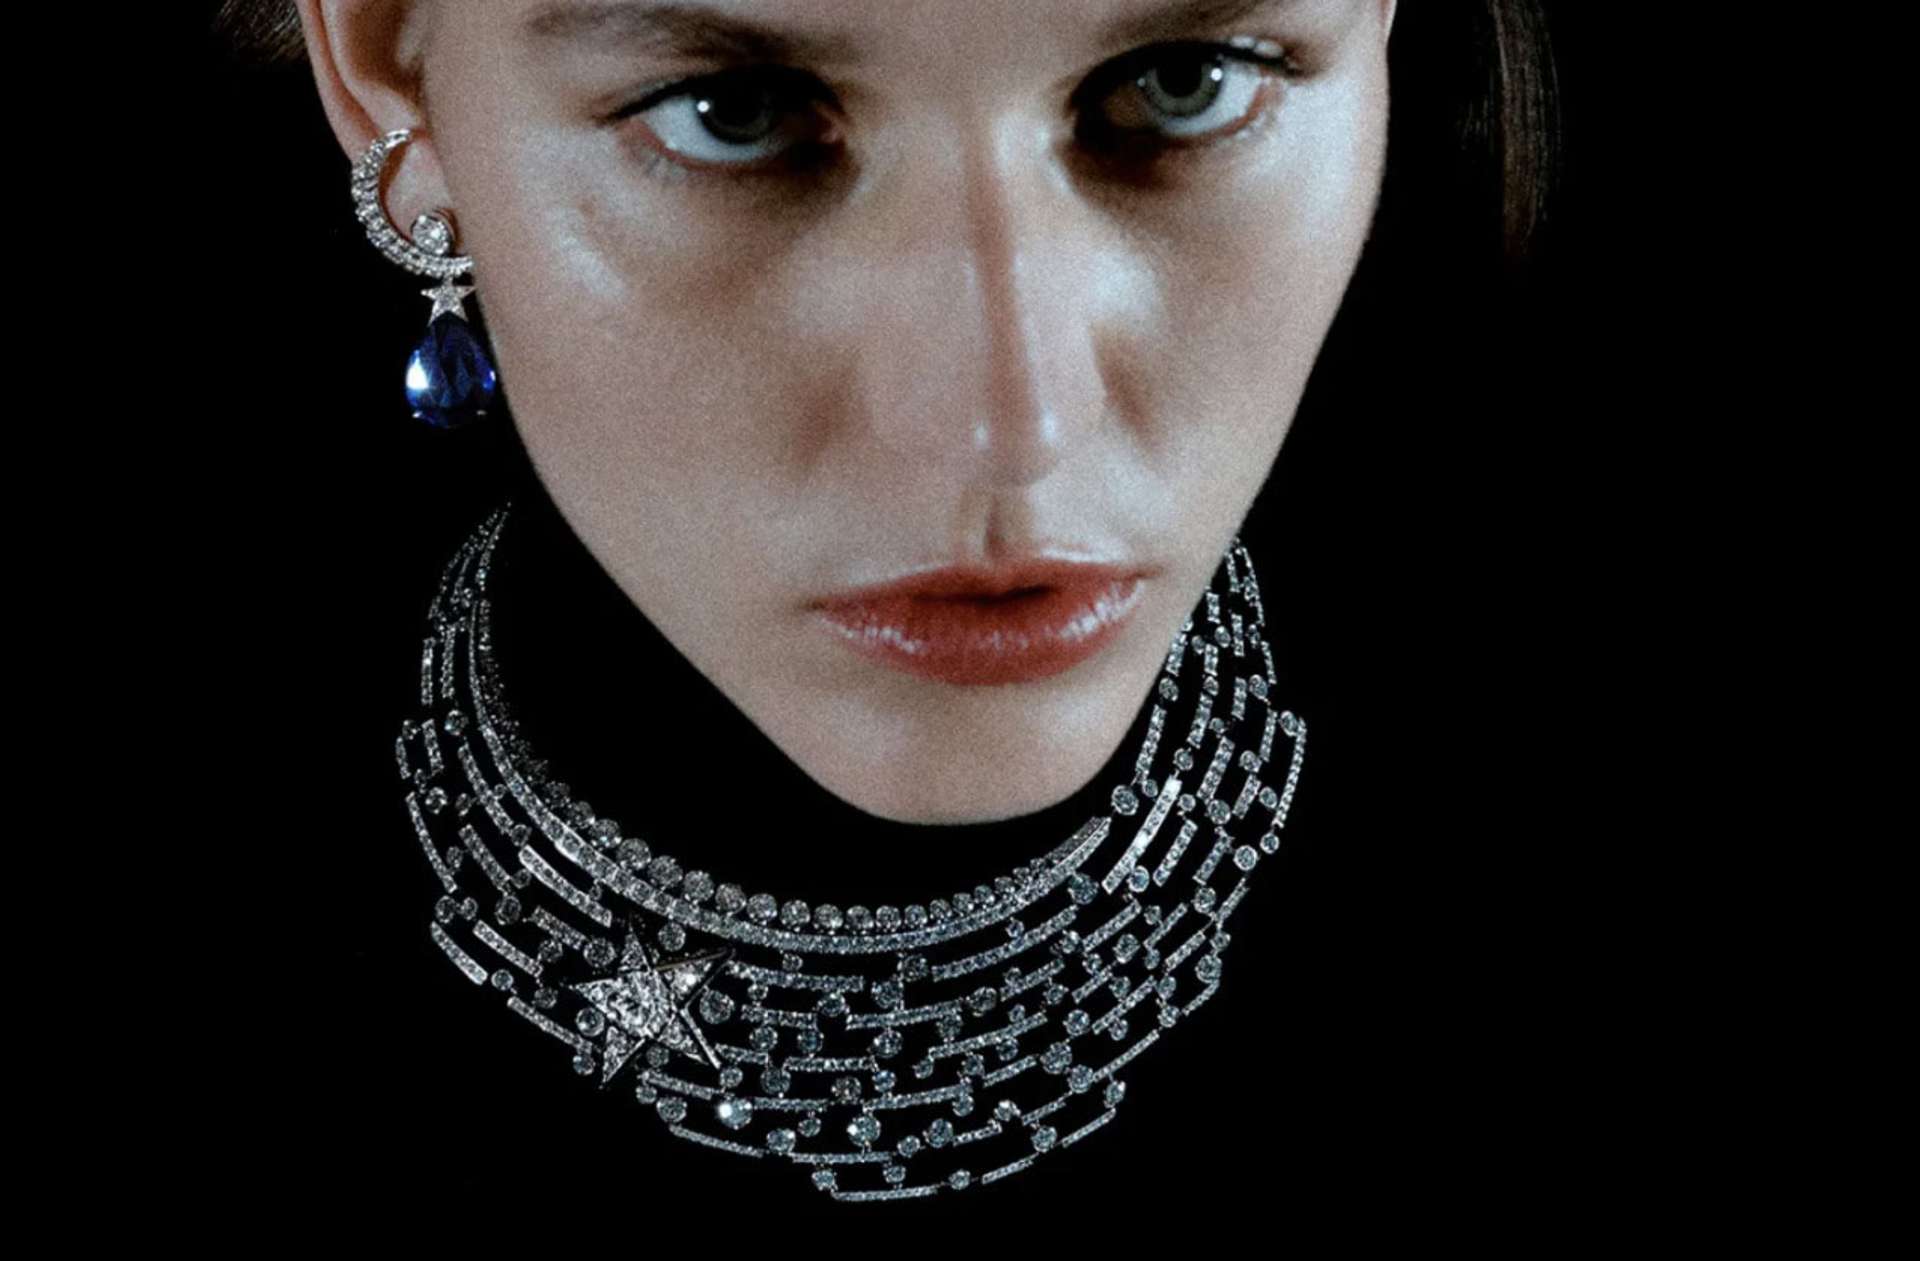 Woman wearing a thick silver choker necklace made up of links with a bejewelled star on one side, and earrings in the shape of a moon and a blue stone dropping from a connected star